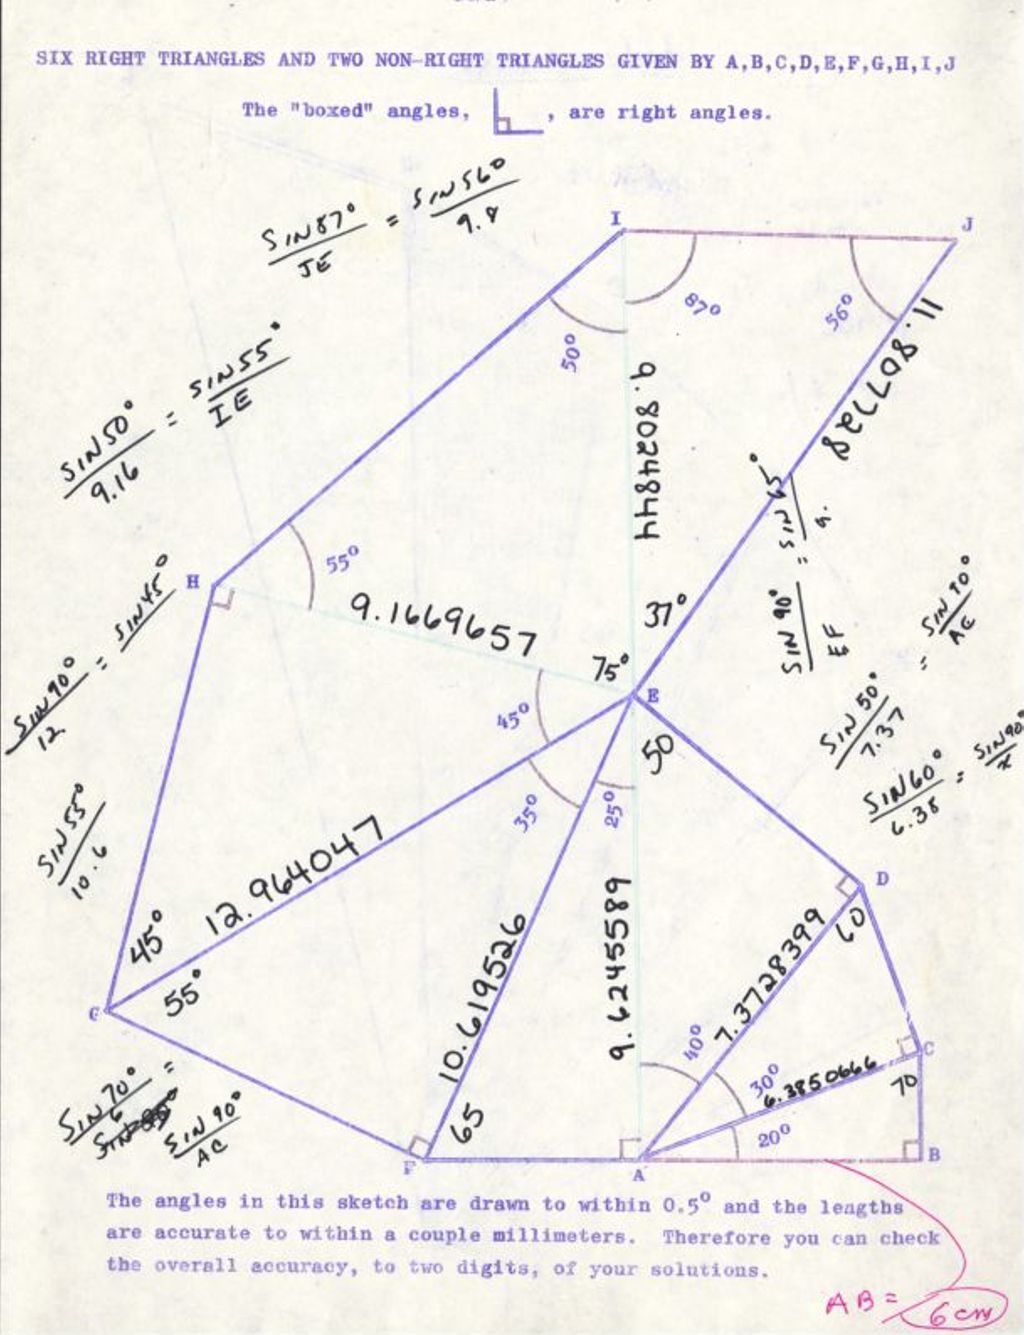 Miniature of Six Right Triangles and Two Non-Right Triangles Given by A,B, C, D, E, F, G, H, I , J  W/AK